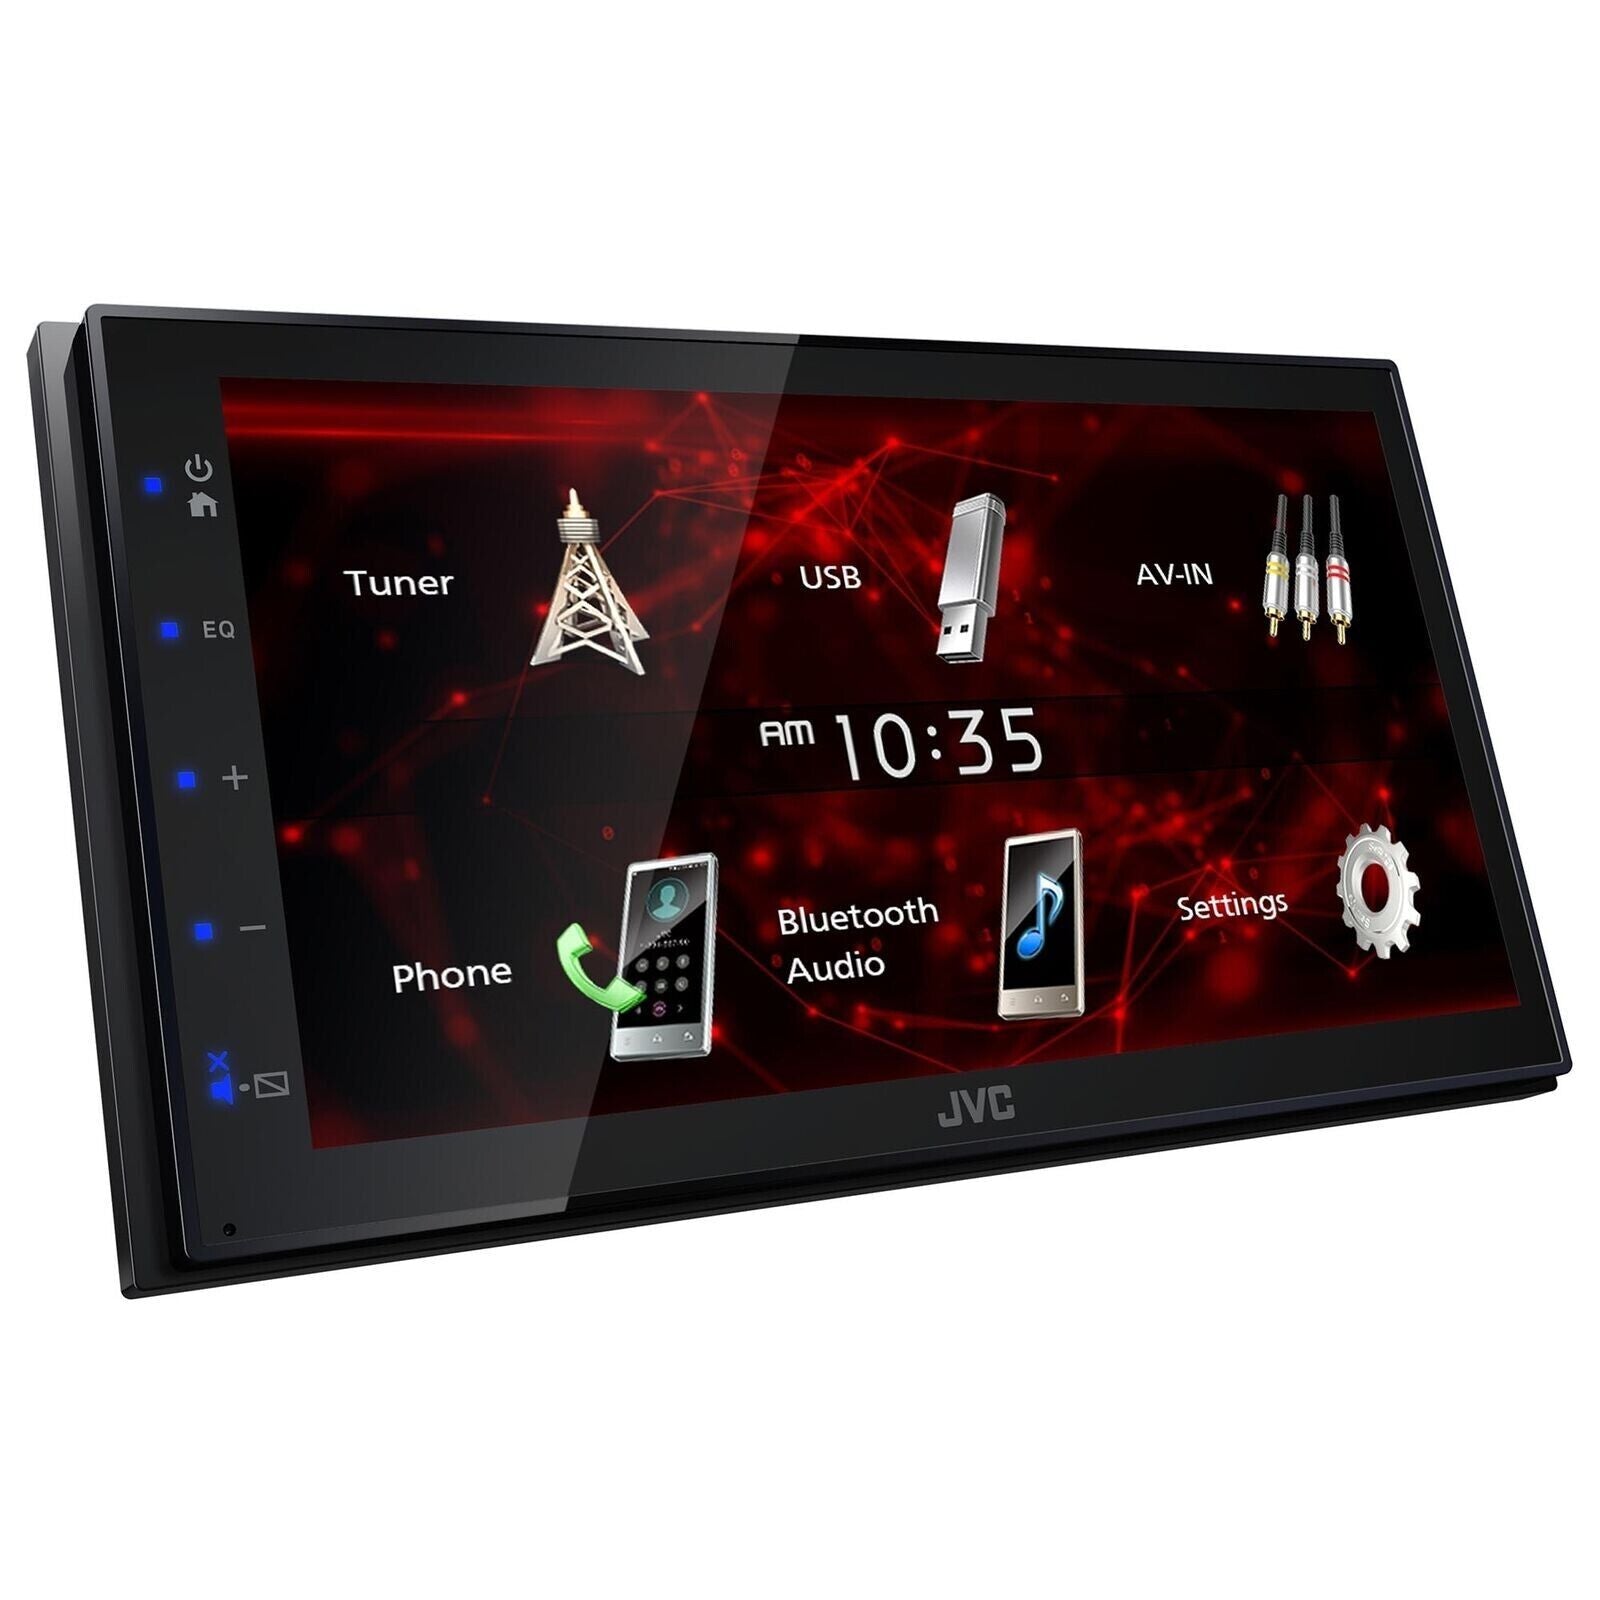 JVC KW-M180BT 2 DIN 6.75" Media Player USB Mirroring For Android Bluetooth + CAM1800 Backup Camera